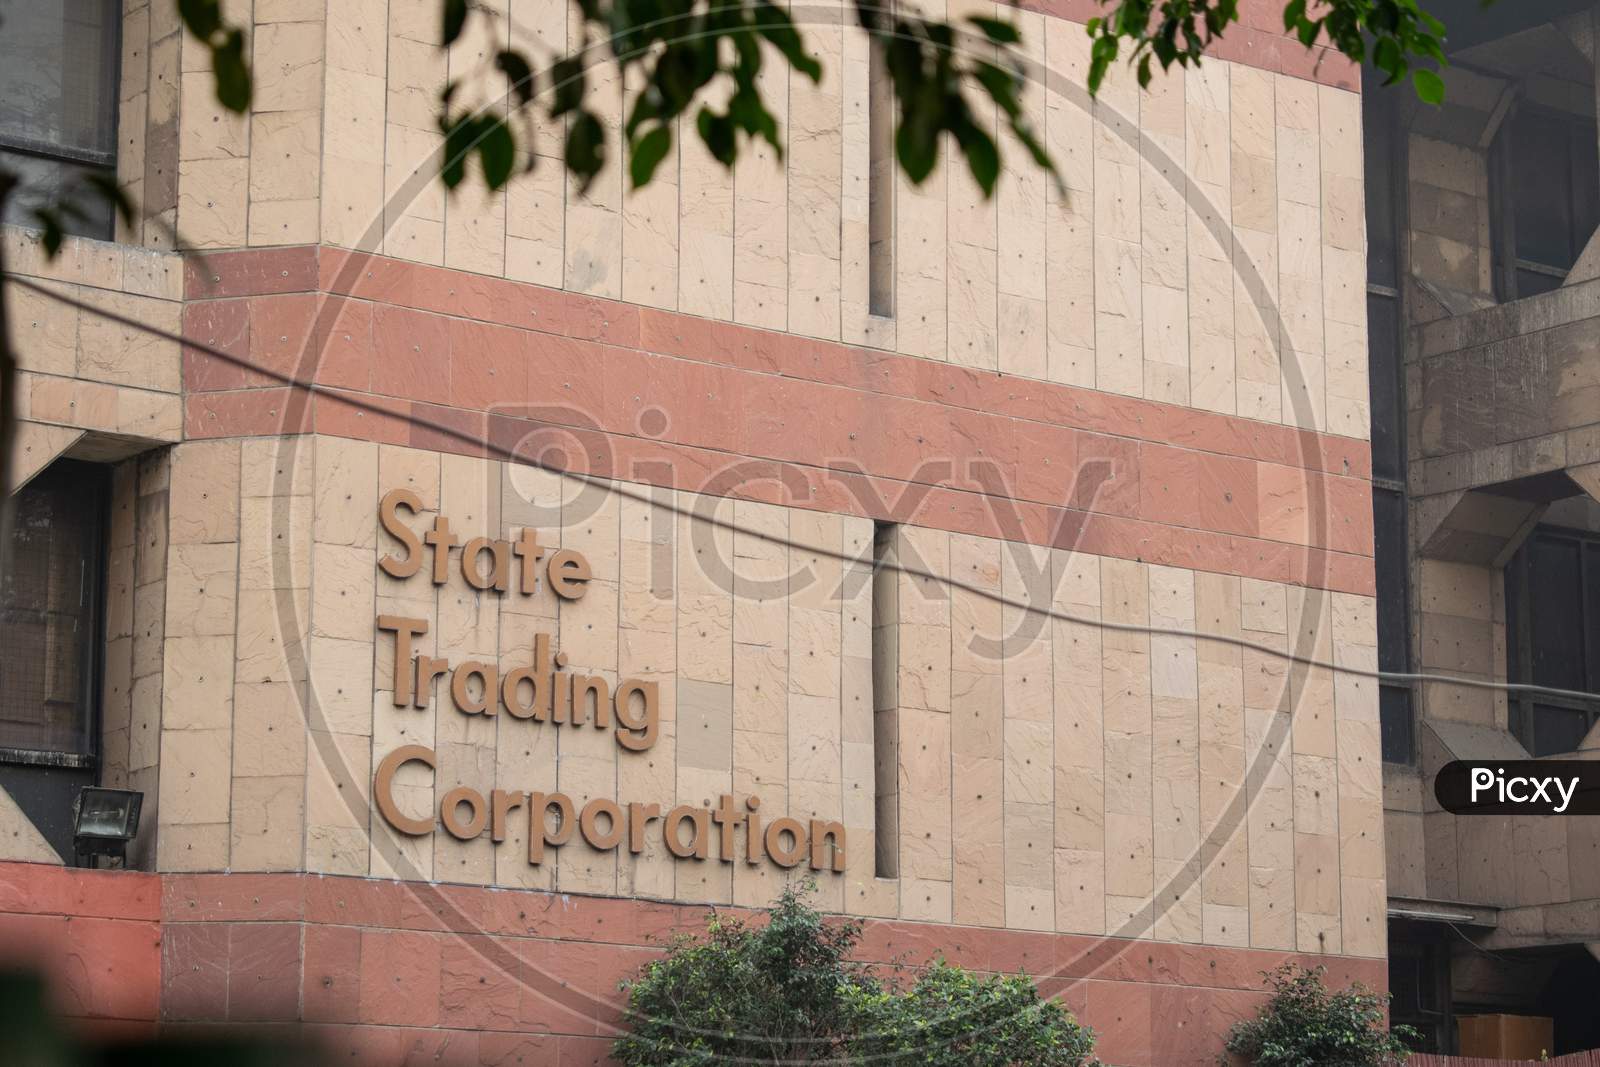 The State Trading Corporation of India Limited